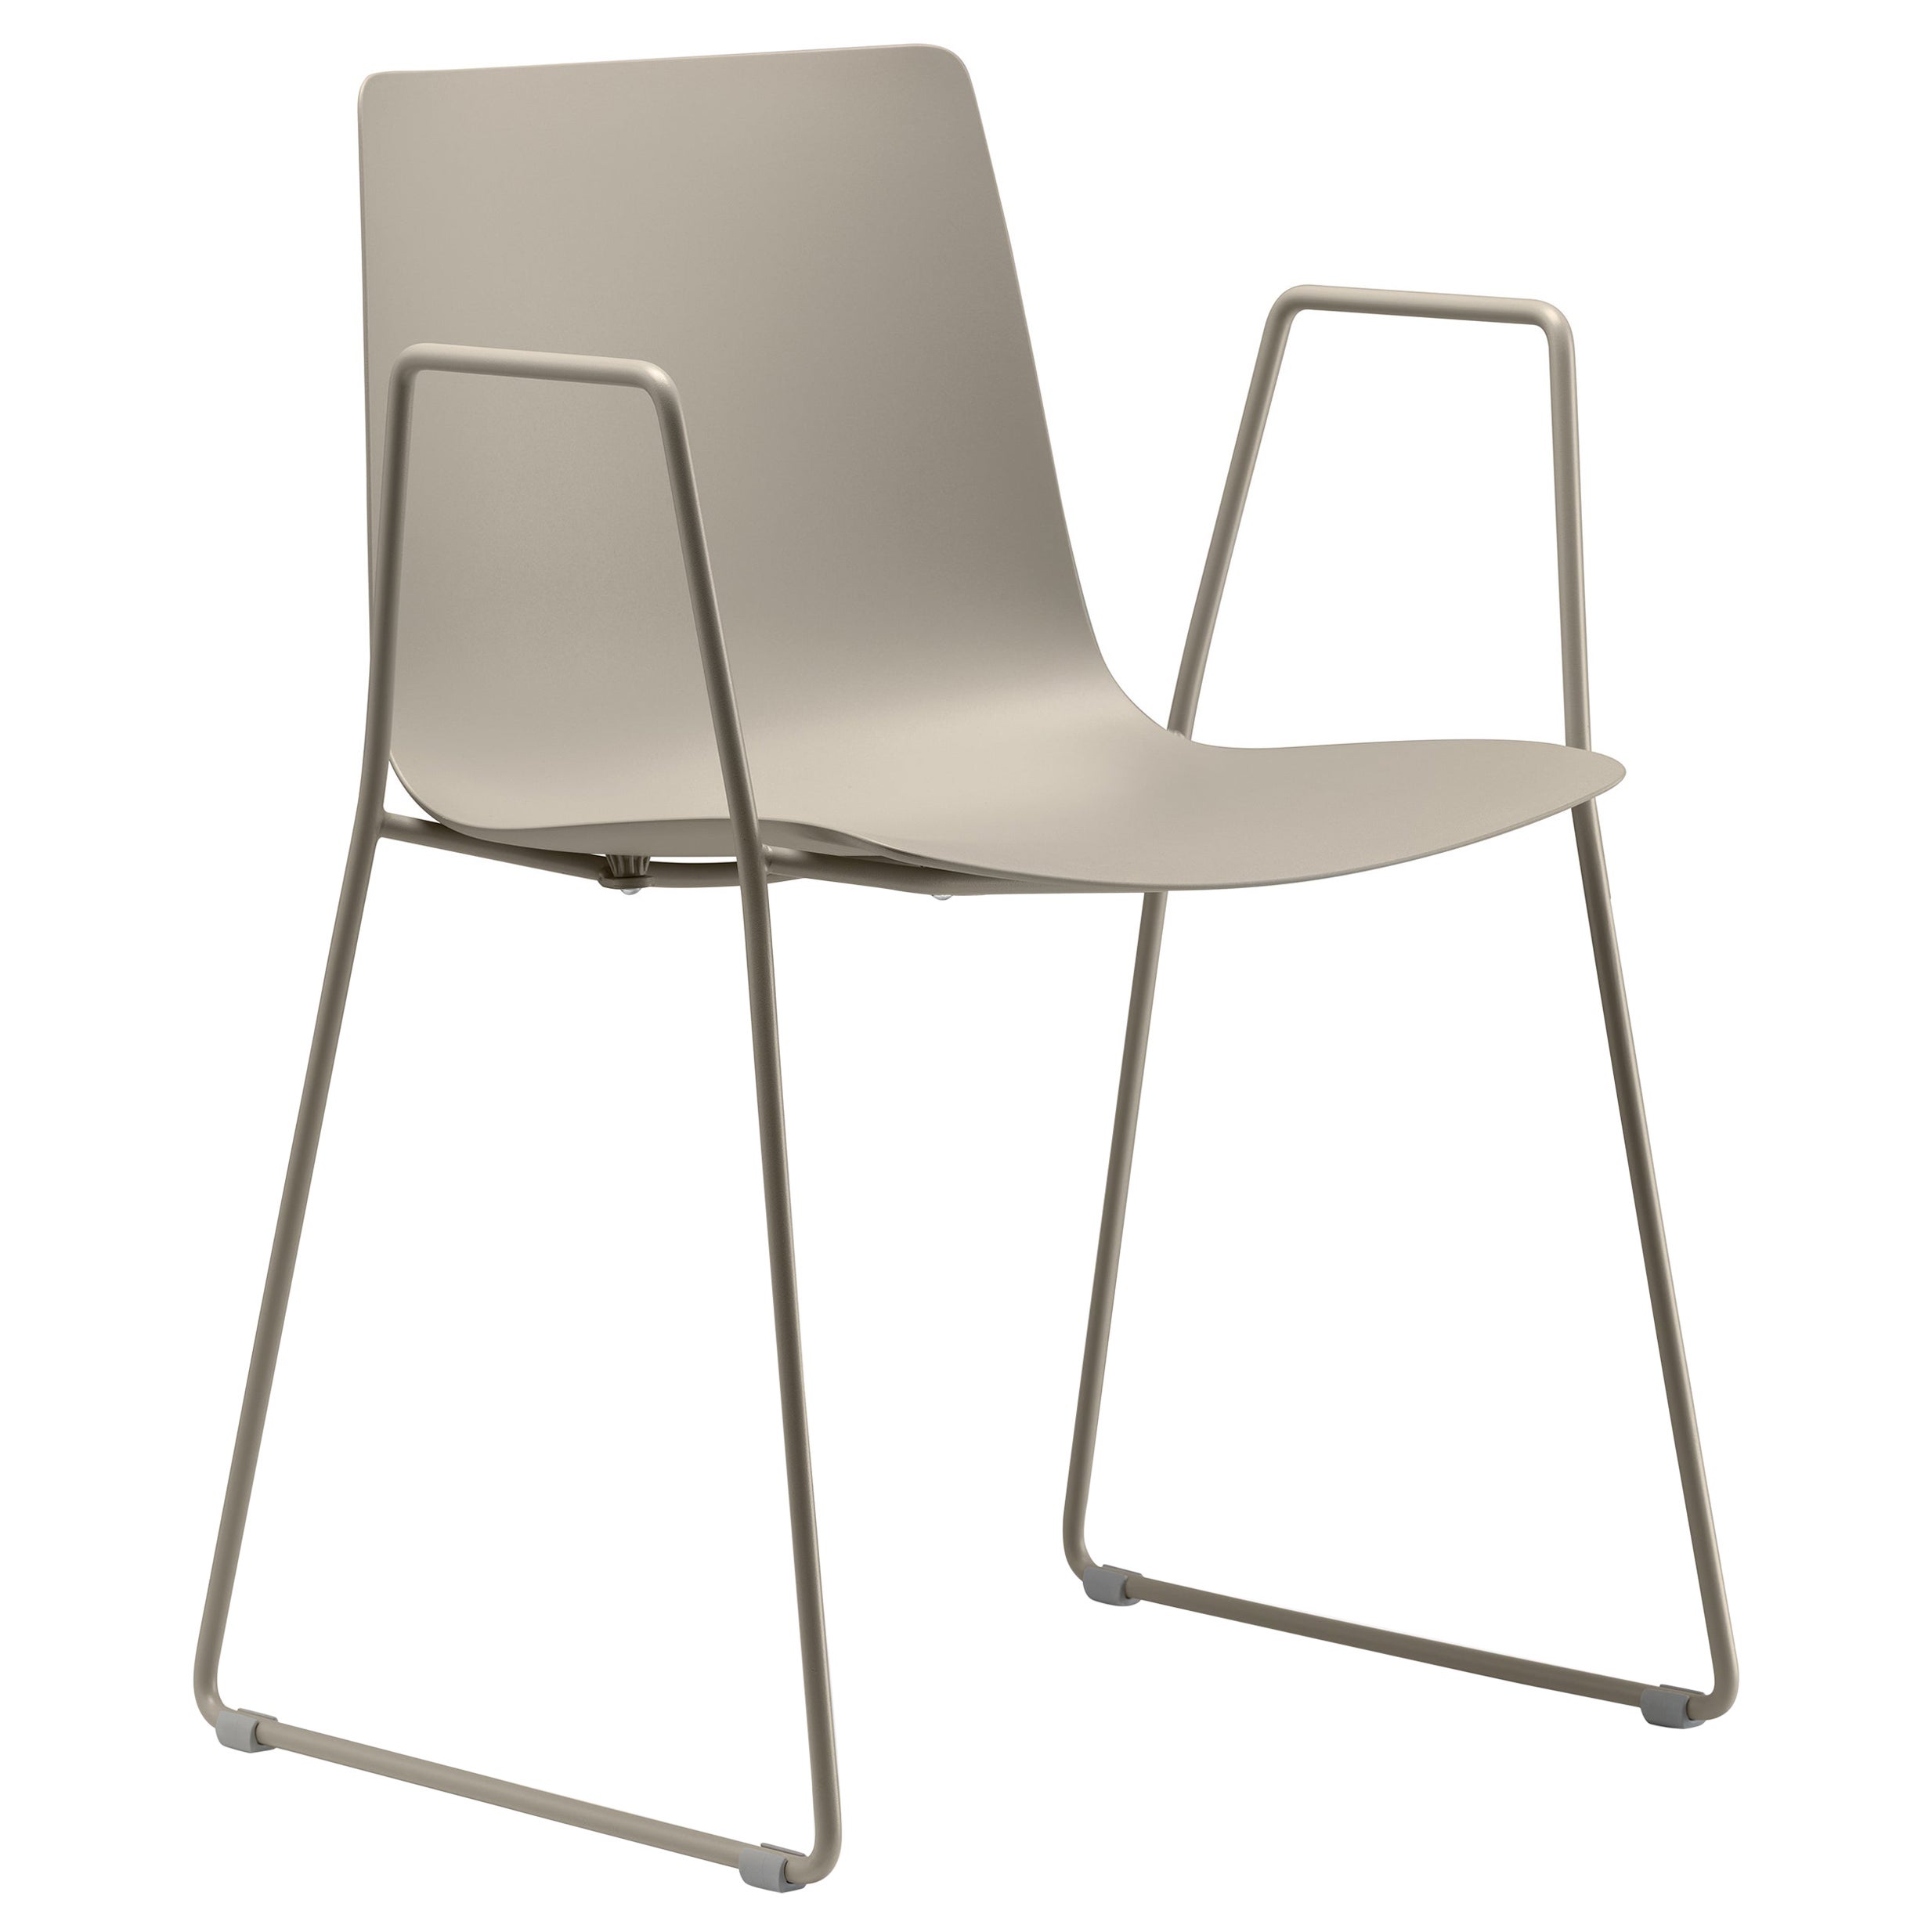 Alias 89B Slim Sledge Armchair in Sand Polypropylene Seat & Lacquered Frame For Sale